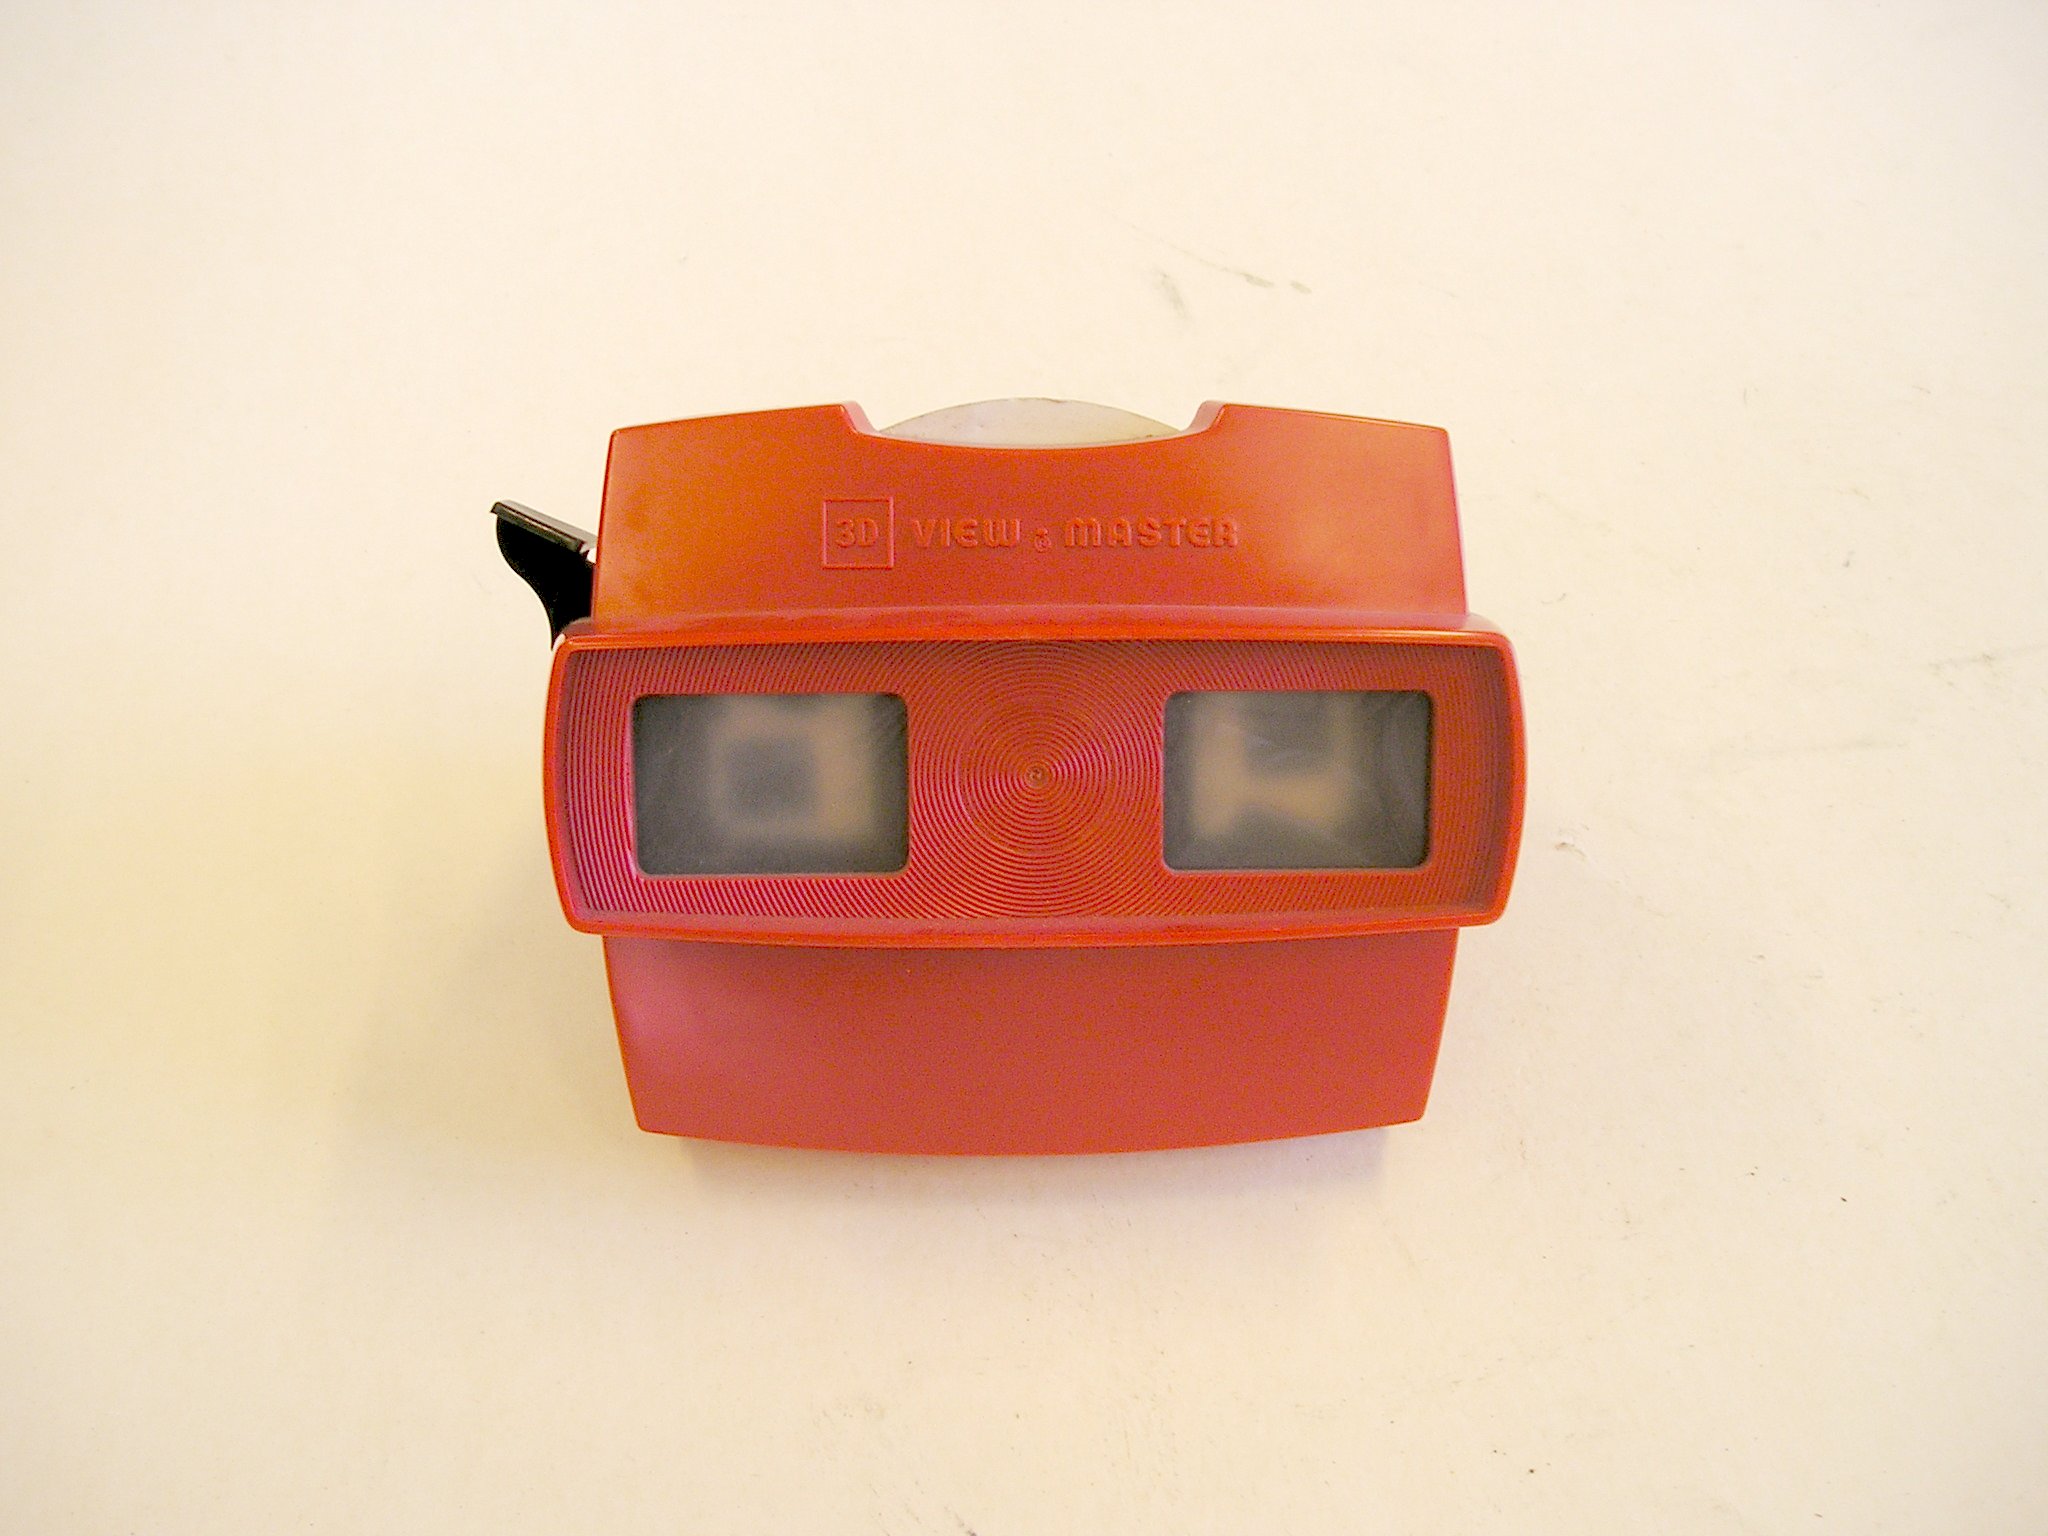 View-Master 3D